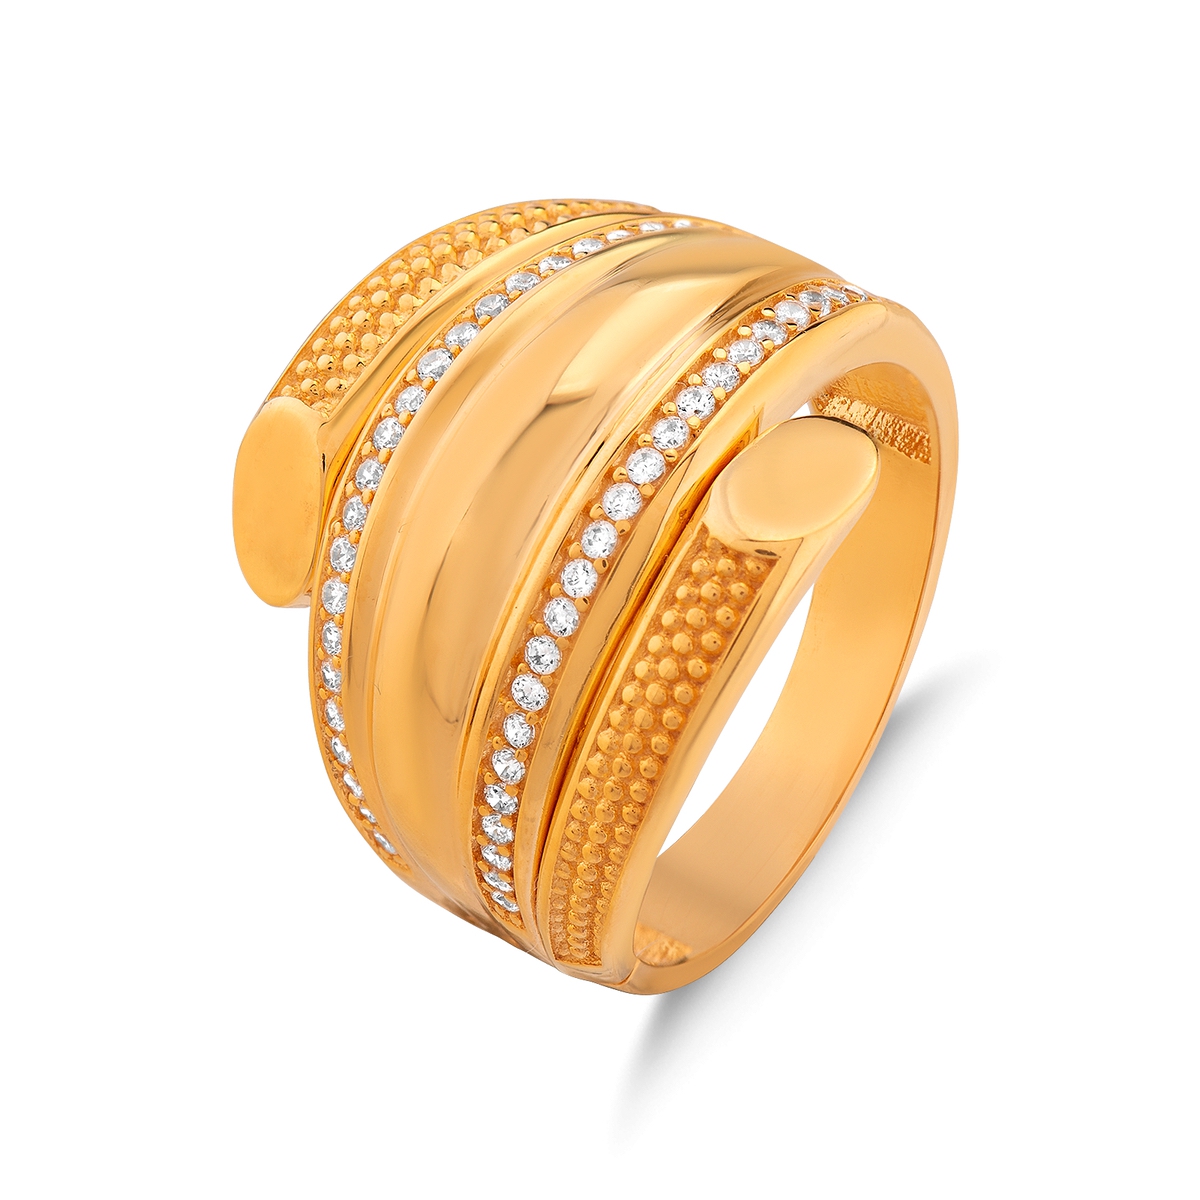 21K 0.410 ct Gold Ring With Stones